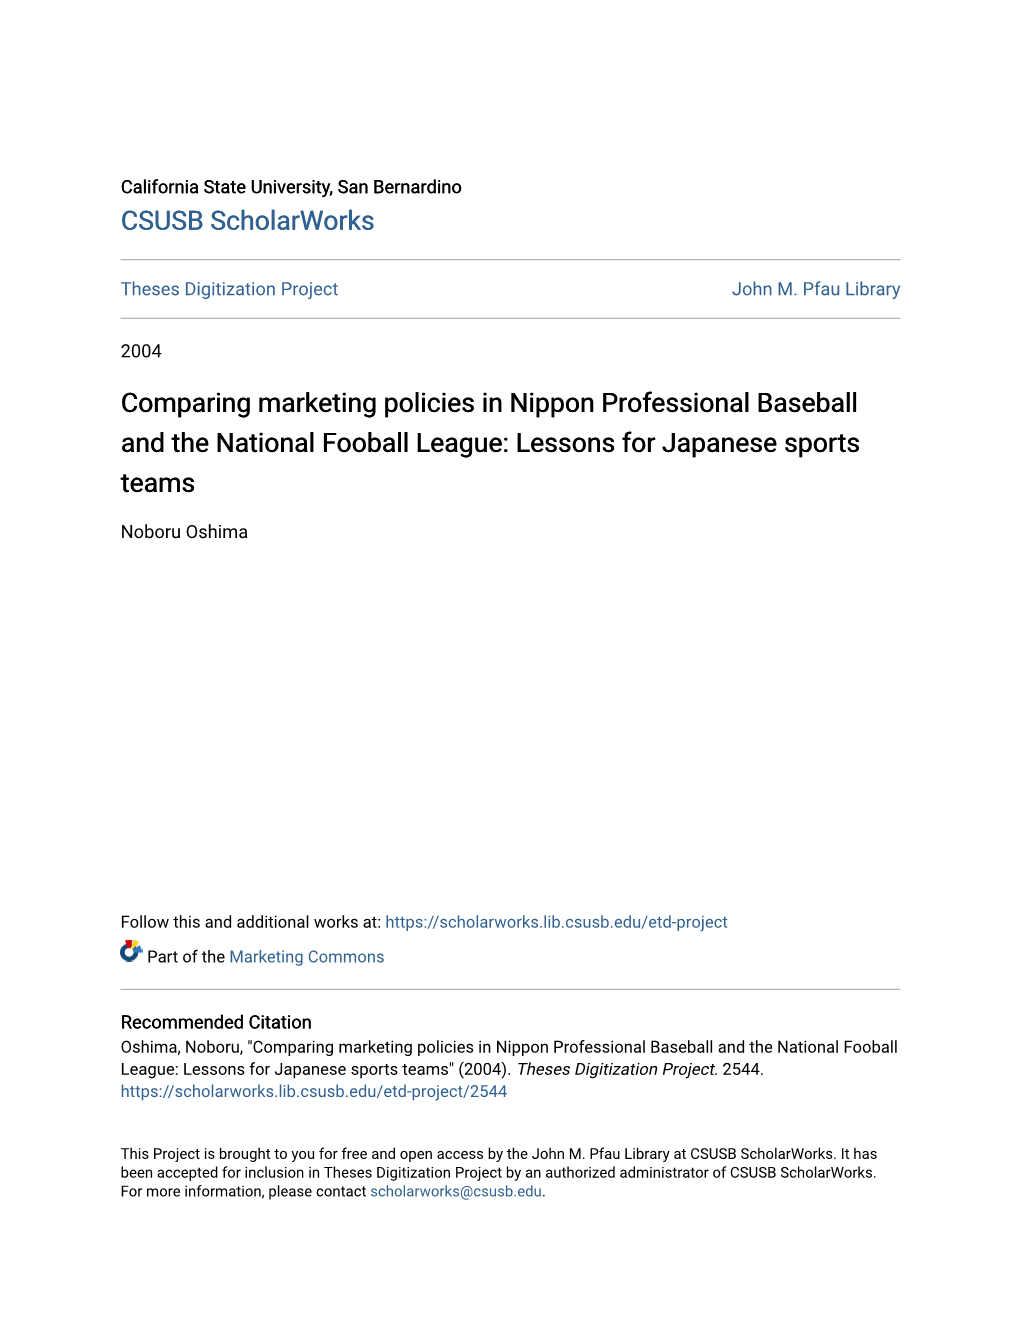 Comparing Marketing Policies in Nippon Professional Baseball and the National Fooball League: Lessons for Japanese Sports Teams